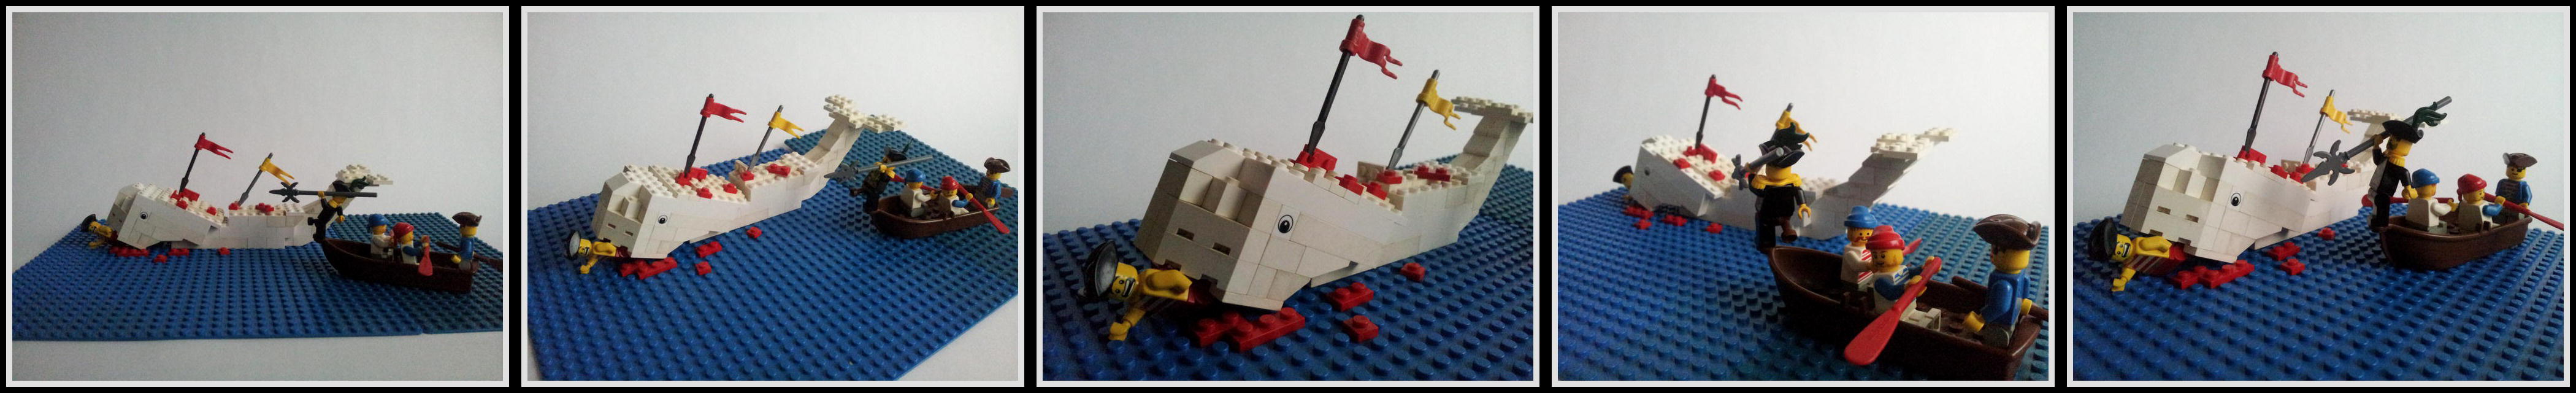 Lego Moby Dick and Captain Ahab